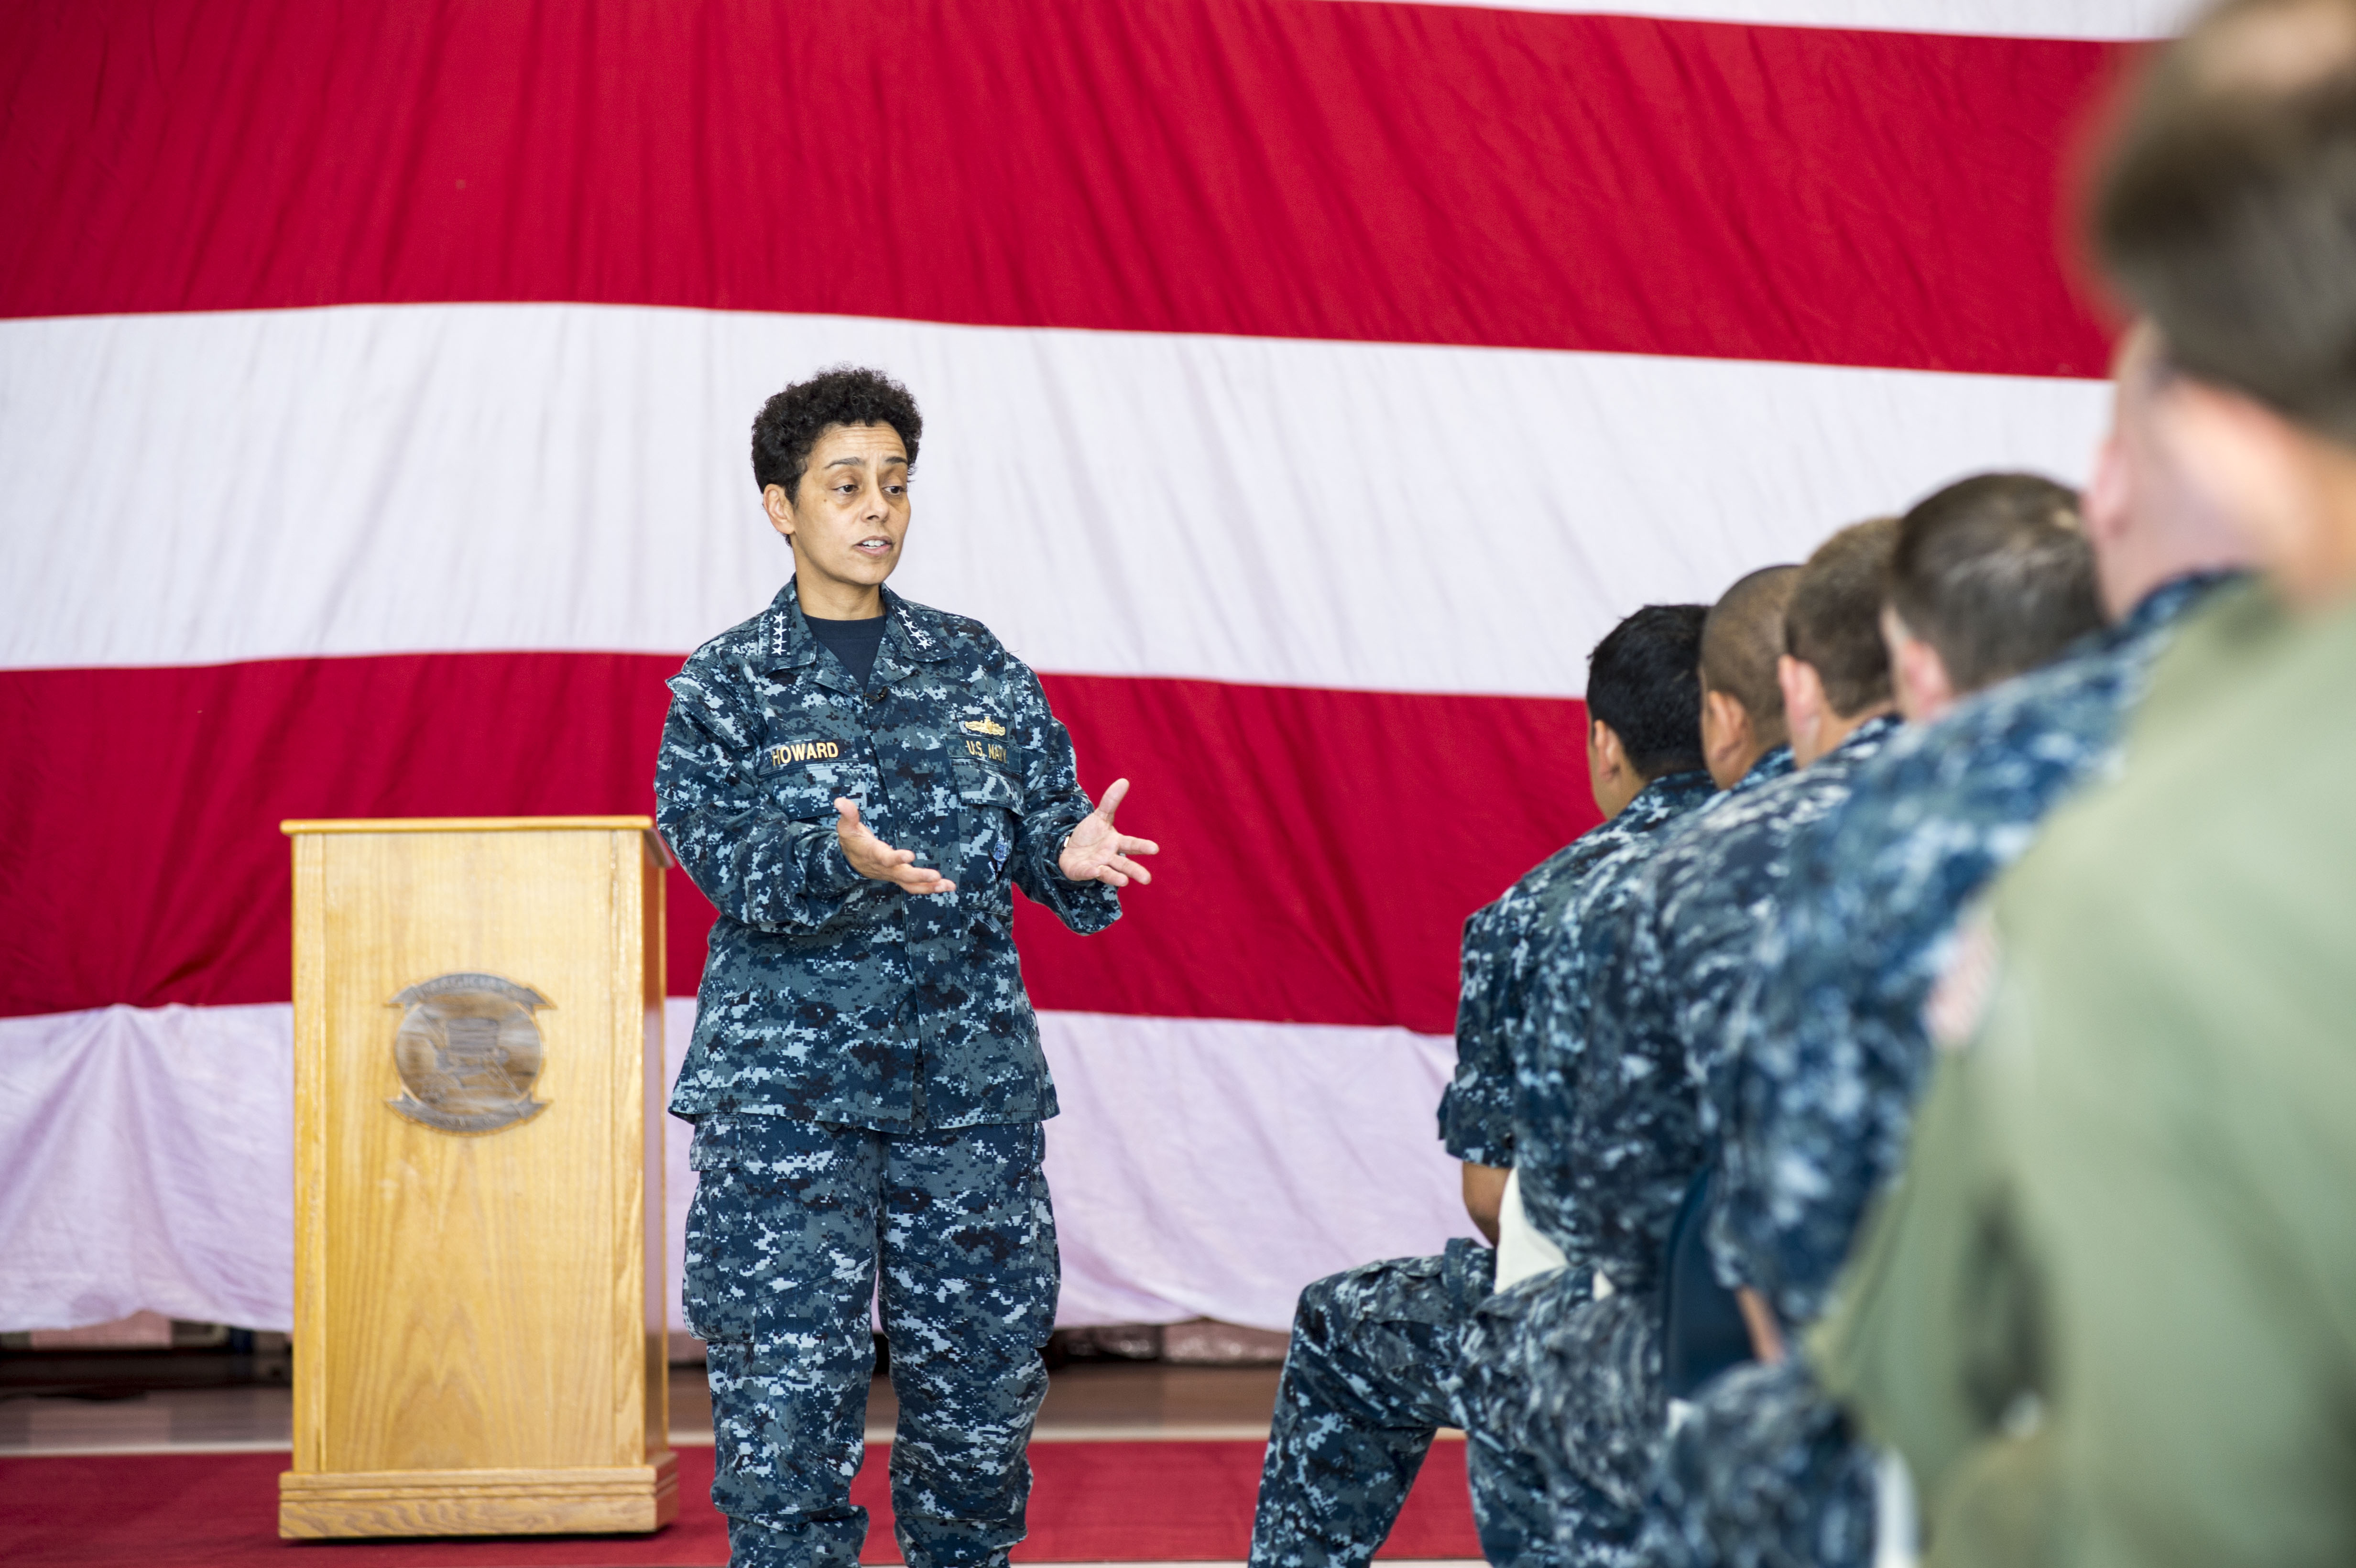 Vice Chief of Naval Operations Adm. Michelle Howard address sailors attached to Maritime Strike Squadron (HSM) 35 during an all-hands call at Naval Air Station North Island, Calif. US Navy Photo